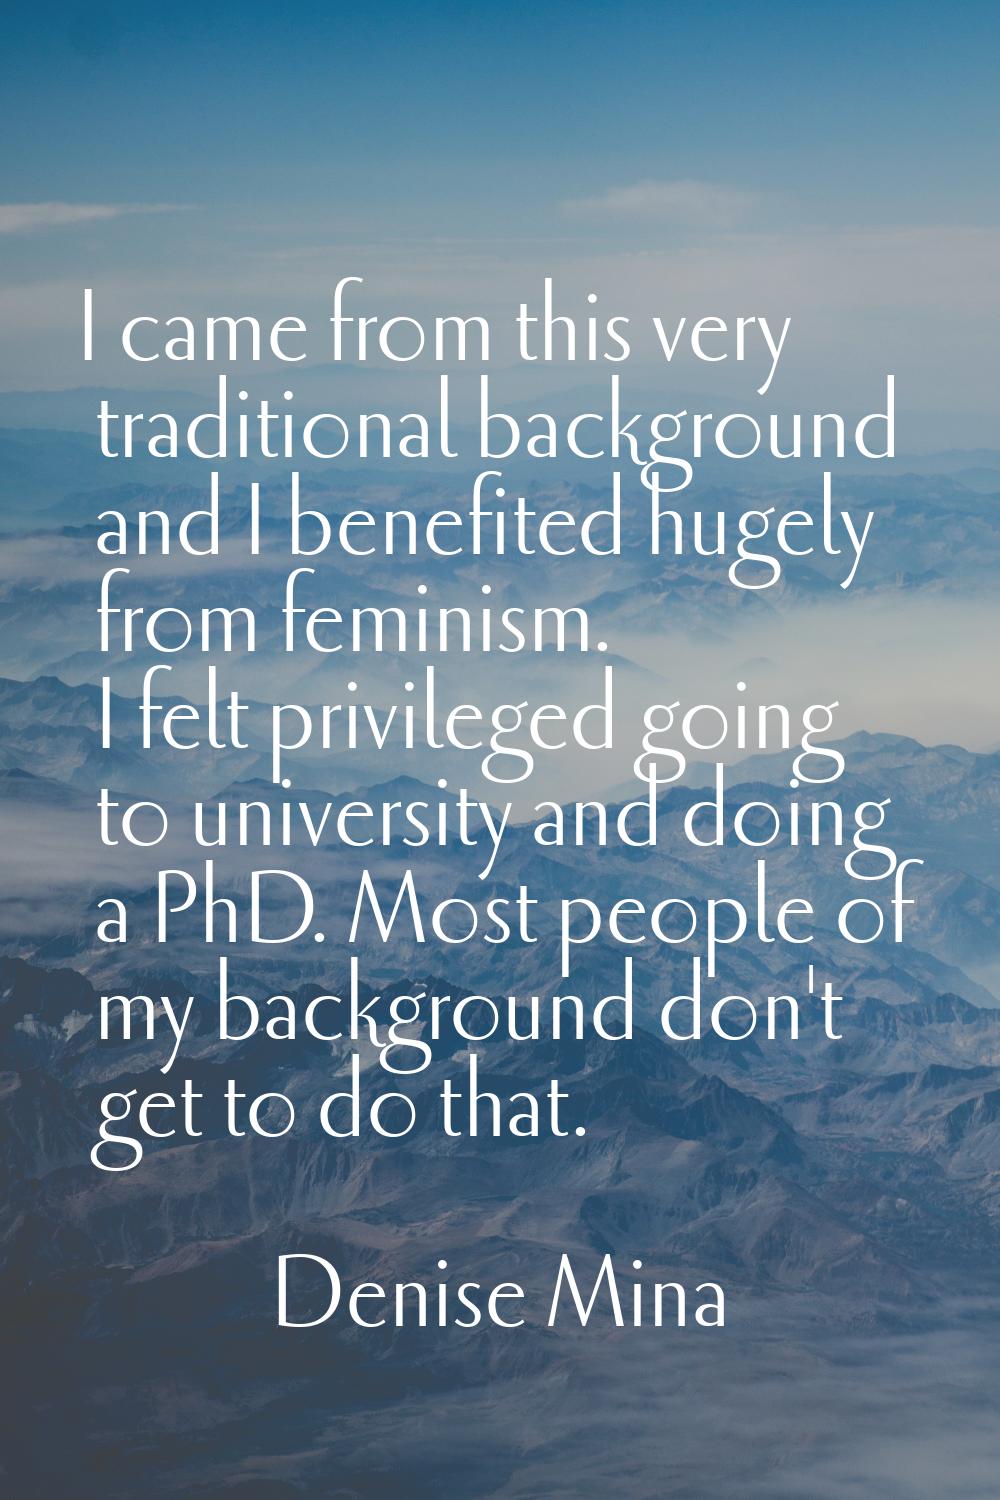 I came from this very traditional background and I benefited hugely from feminism. I felt privilege